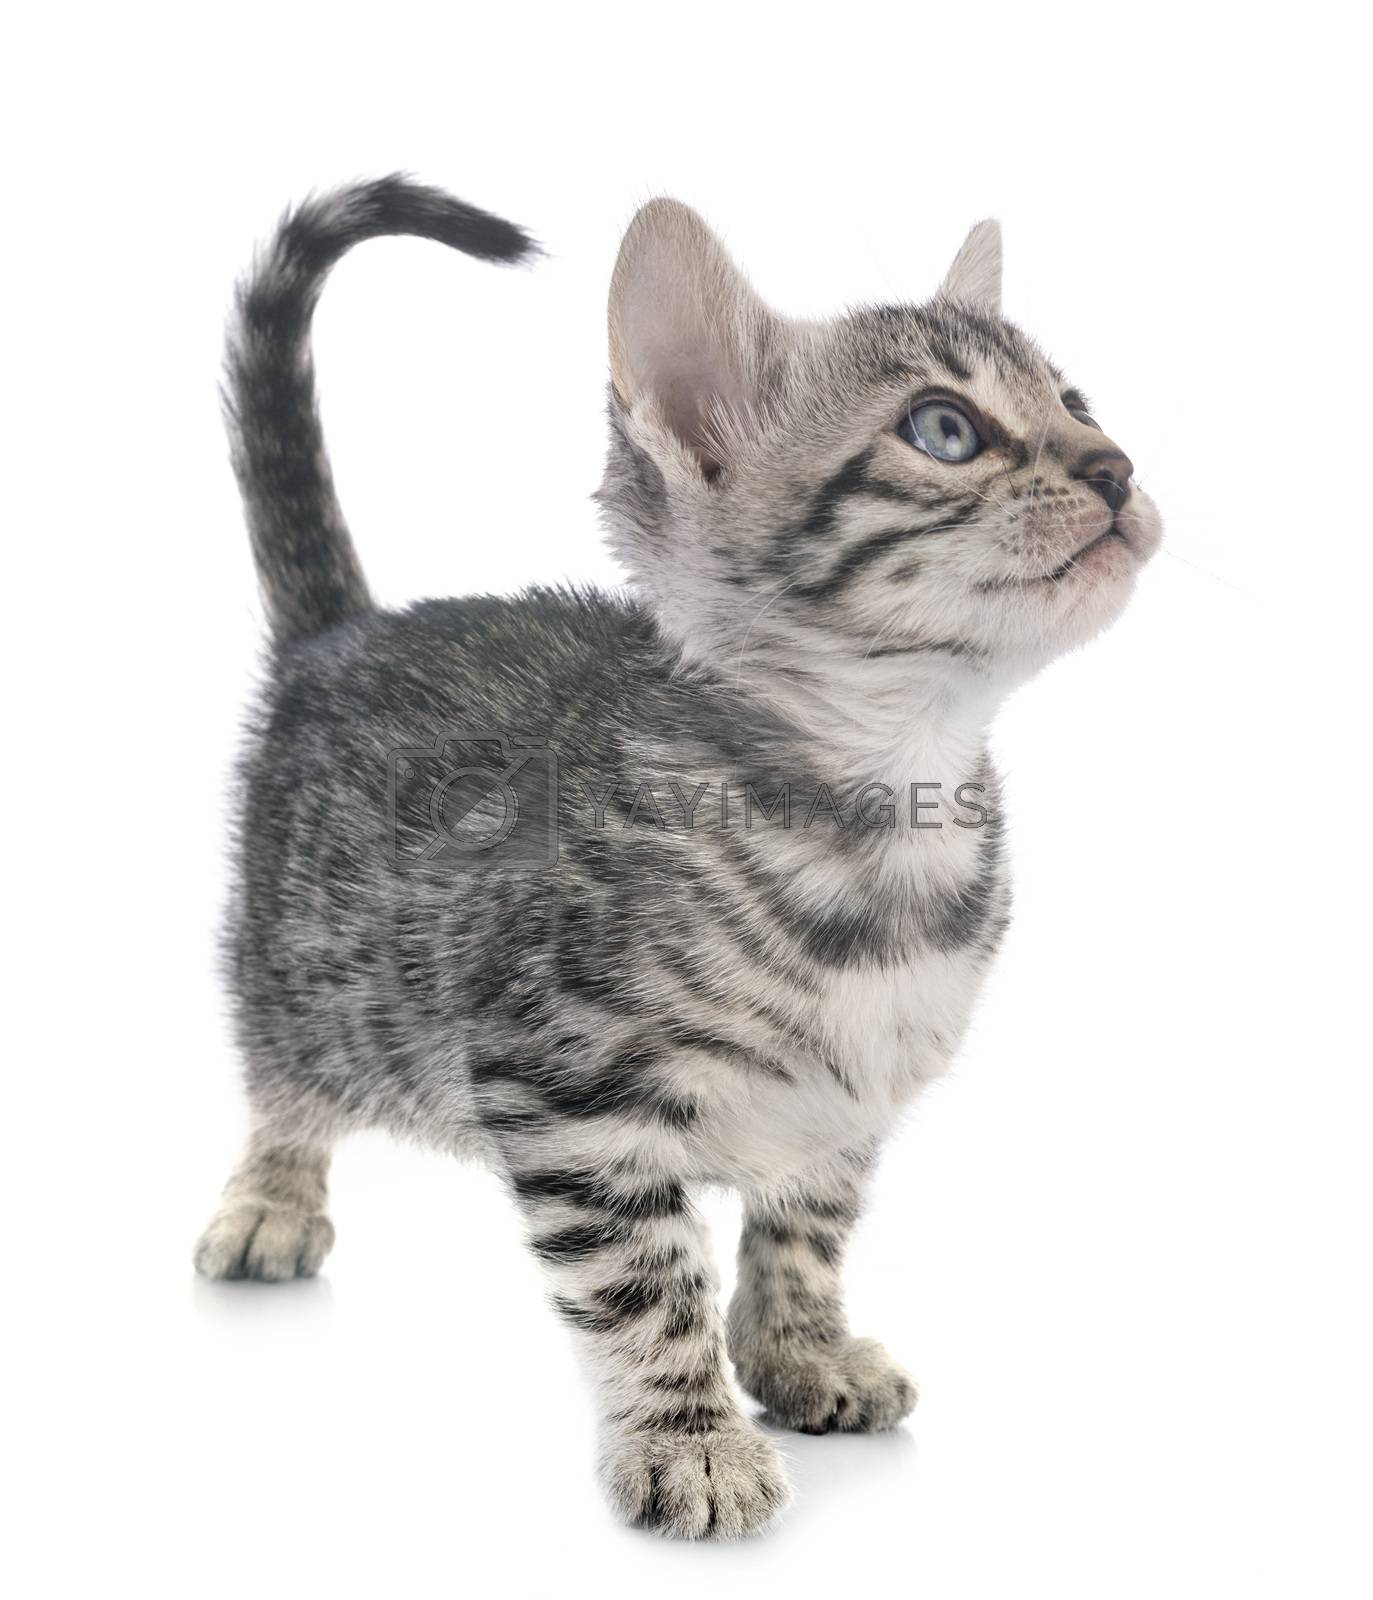 Royalty free image of bengal kitten in studio by cynoclub